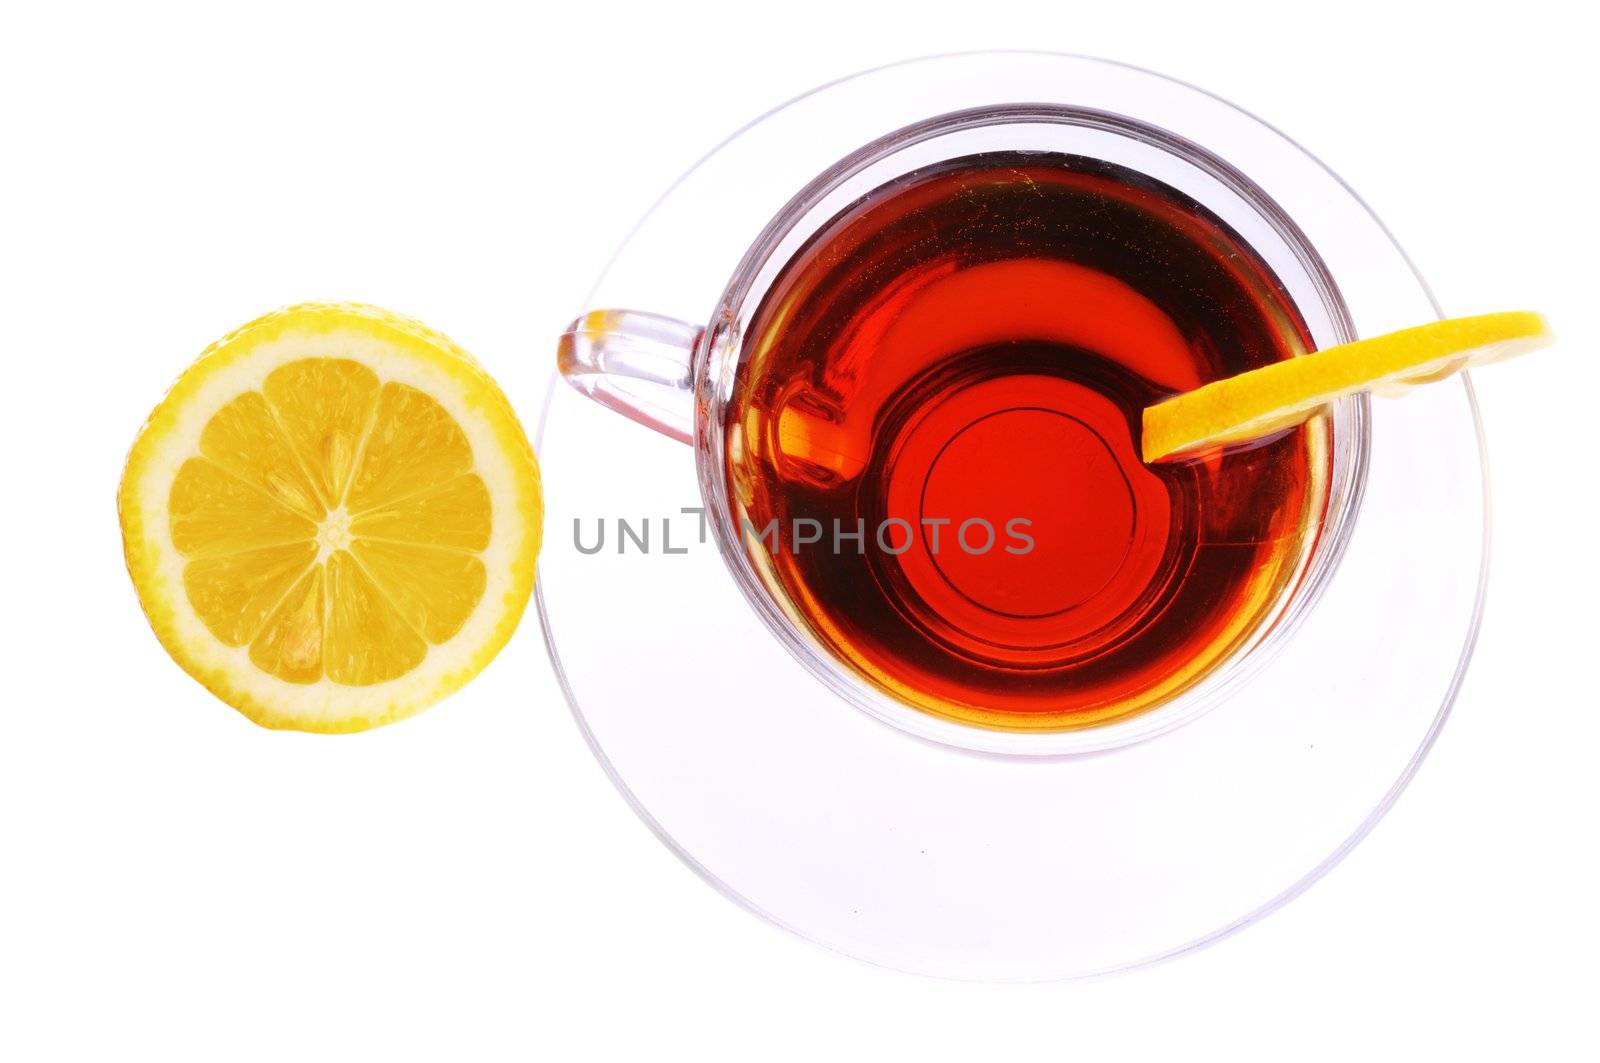 Transparent cup with black tea and a lemon isolated